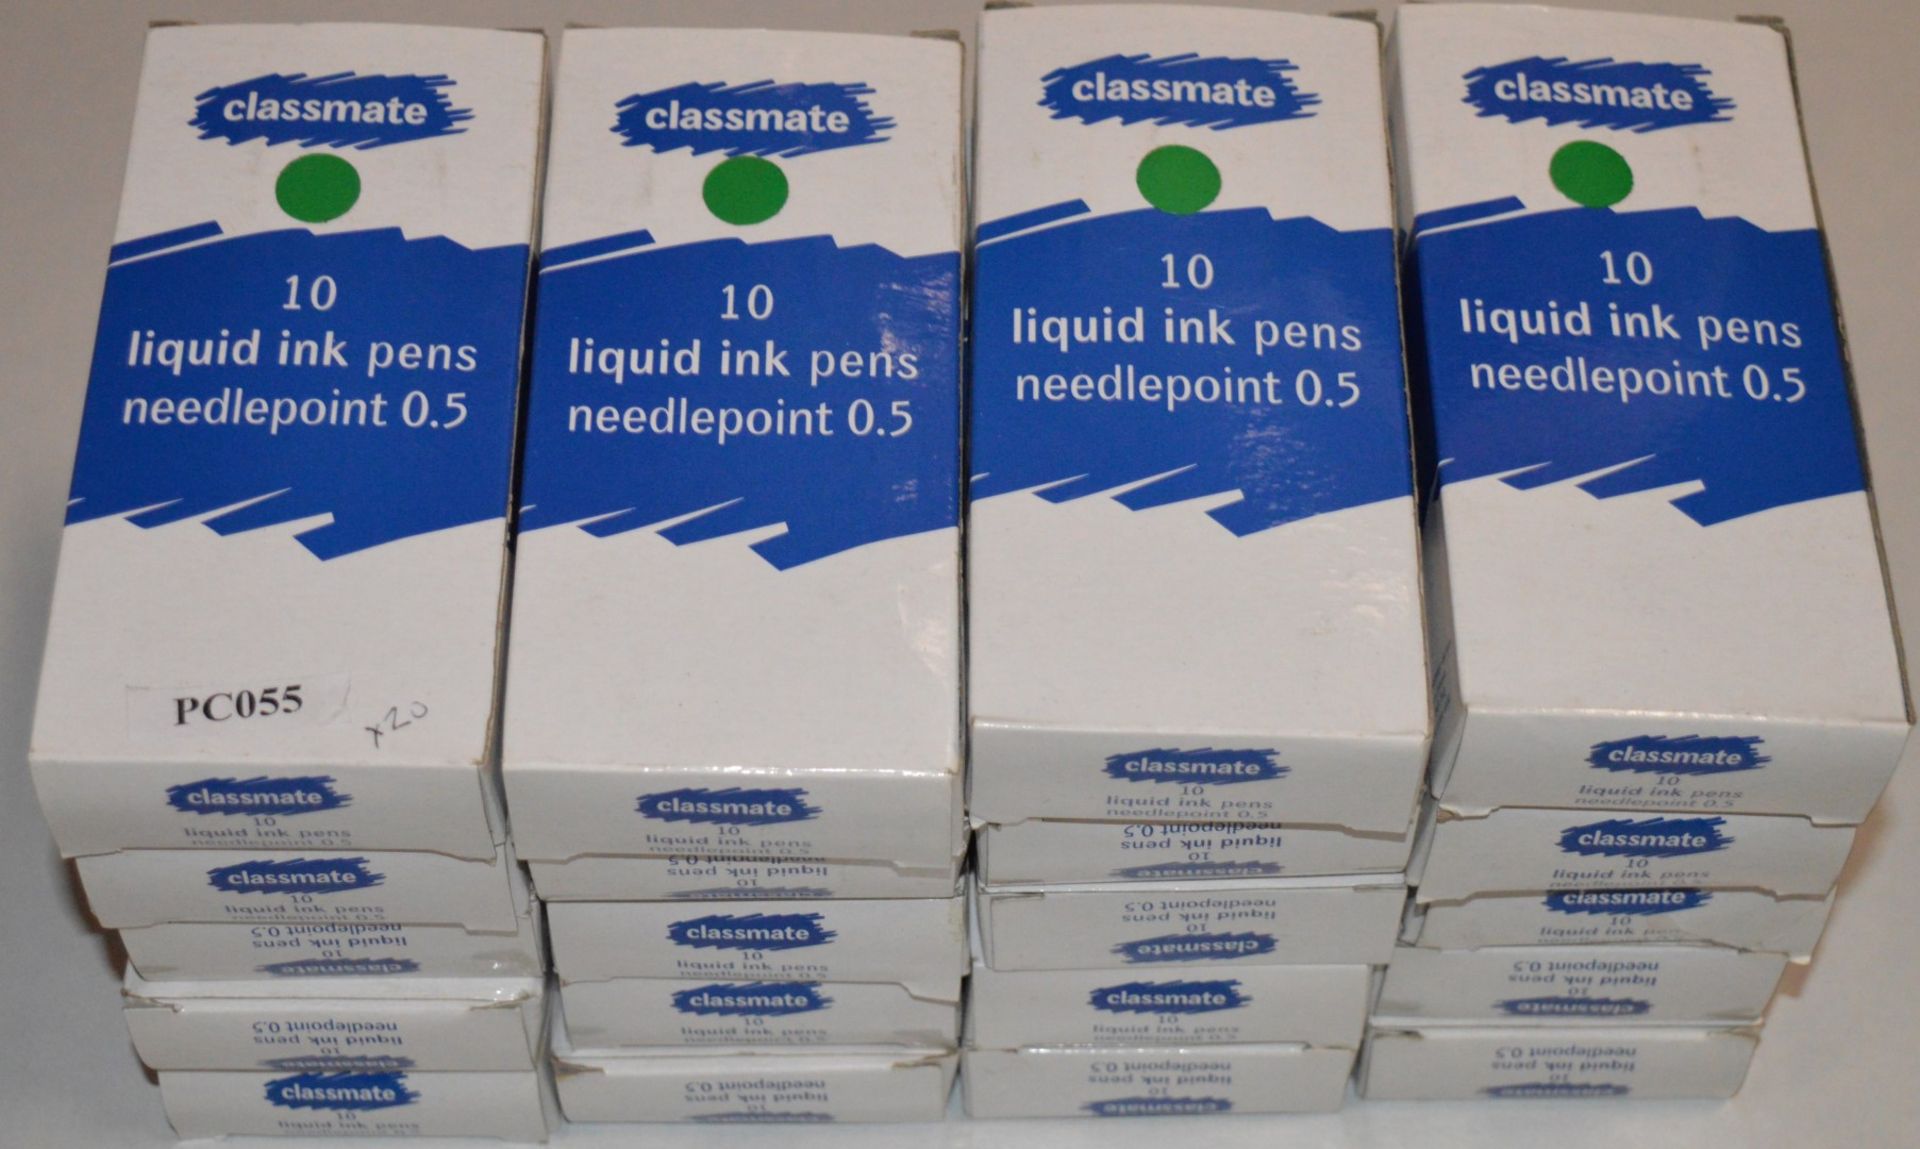 200 x Classmate Liquid Ink Pens - Needlepoint 0.5 - Includes 20 x Packs of 10 x Pens - New and - Image 2 of 3